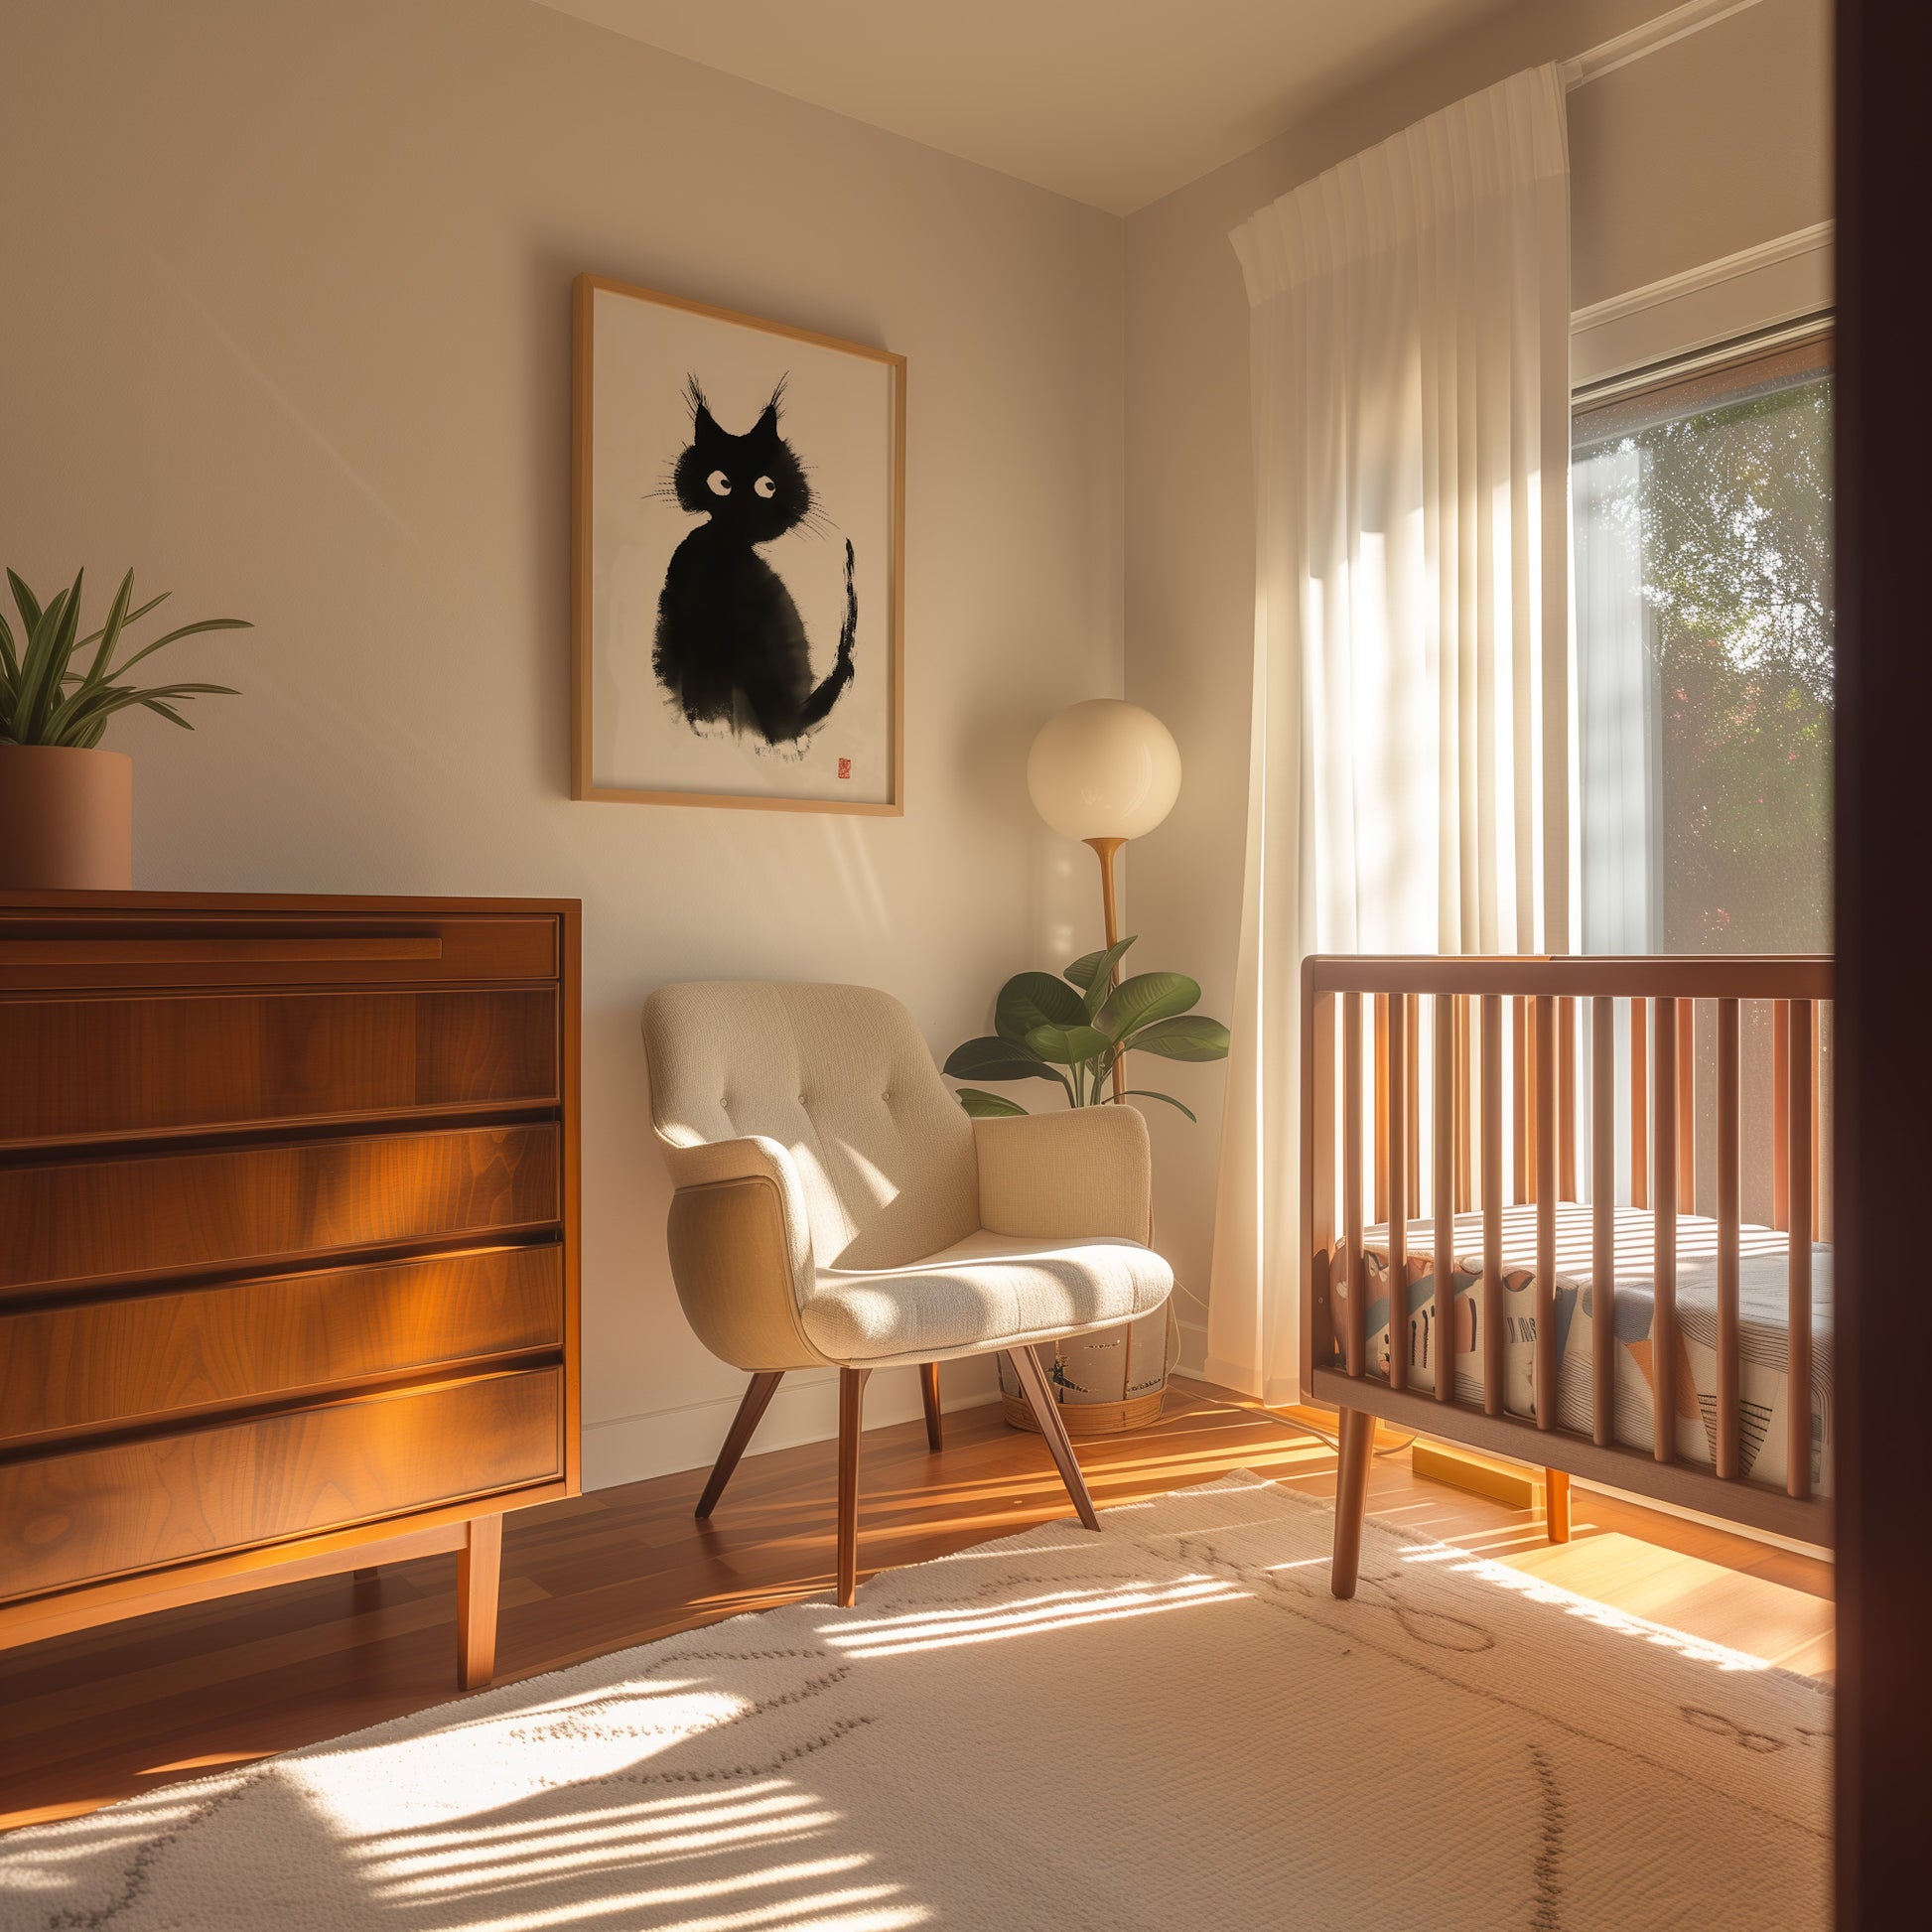 A cozy nursery room with warm sunlight, a crib, armchair, and cat painting on the wall.